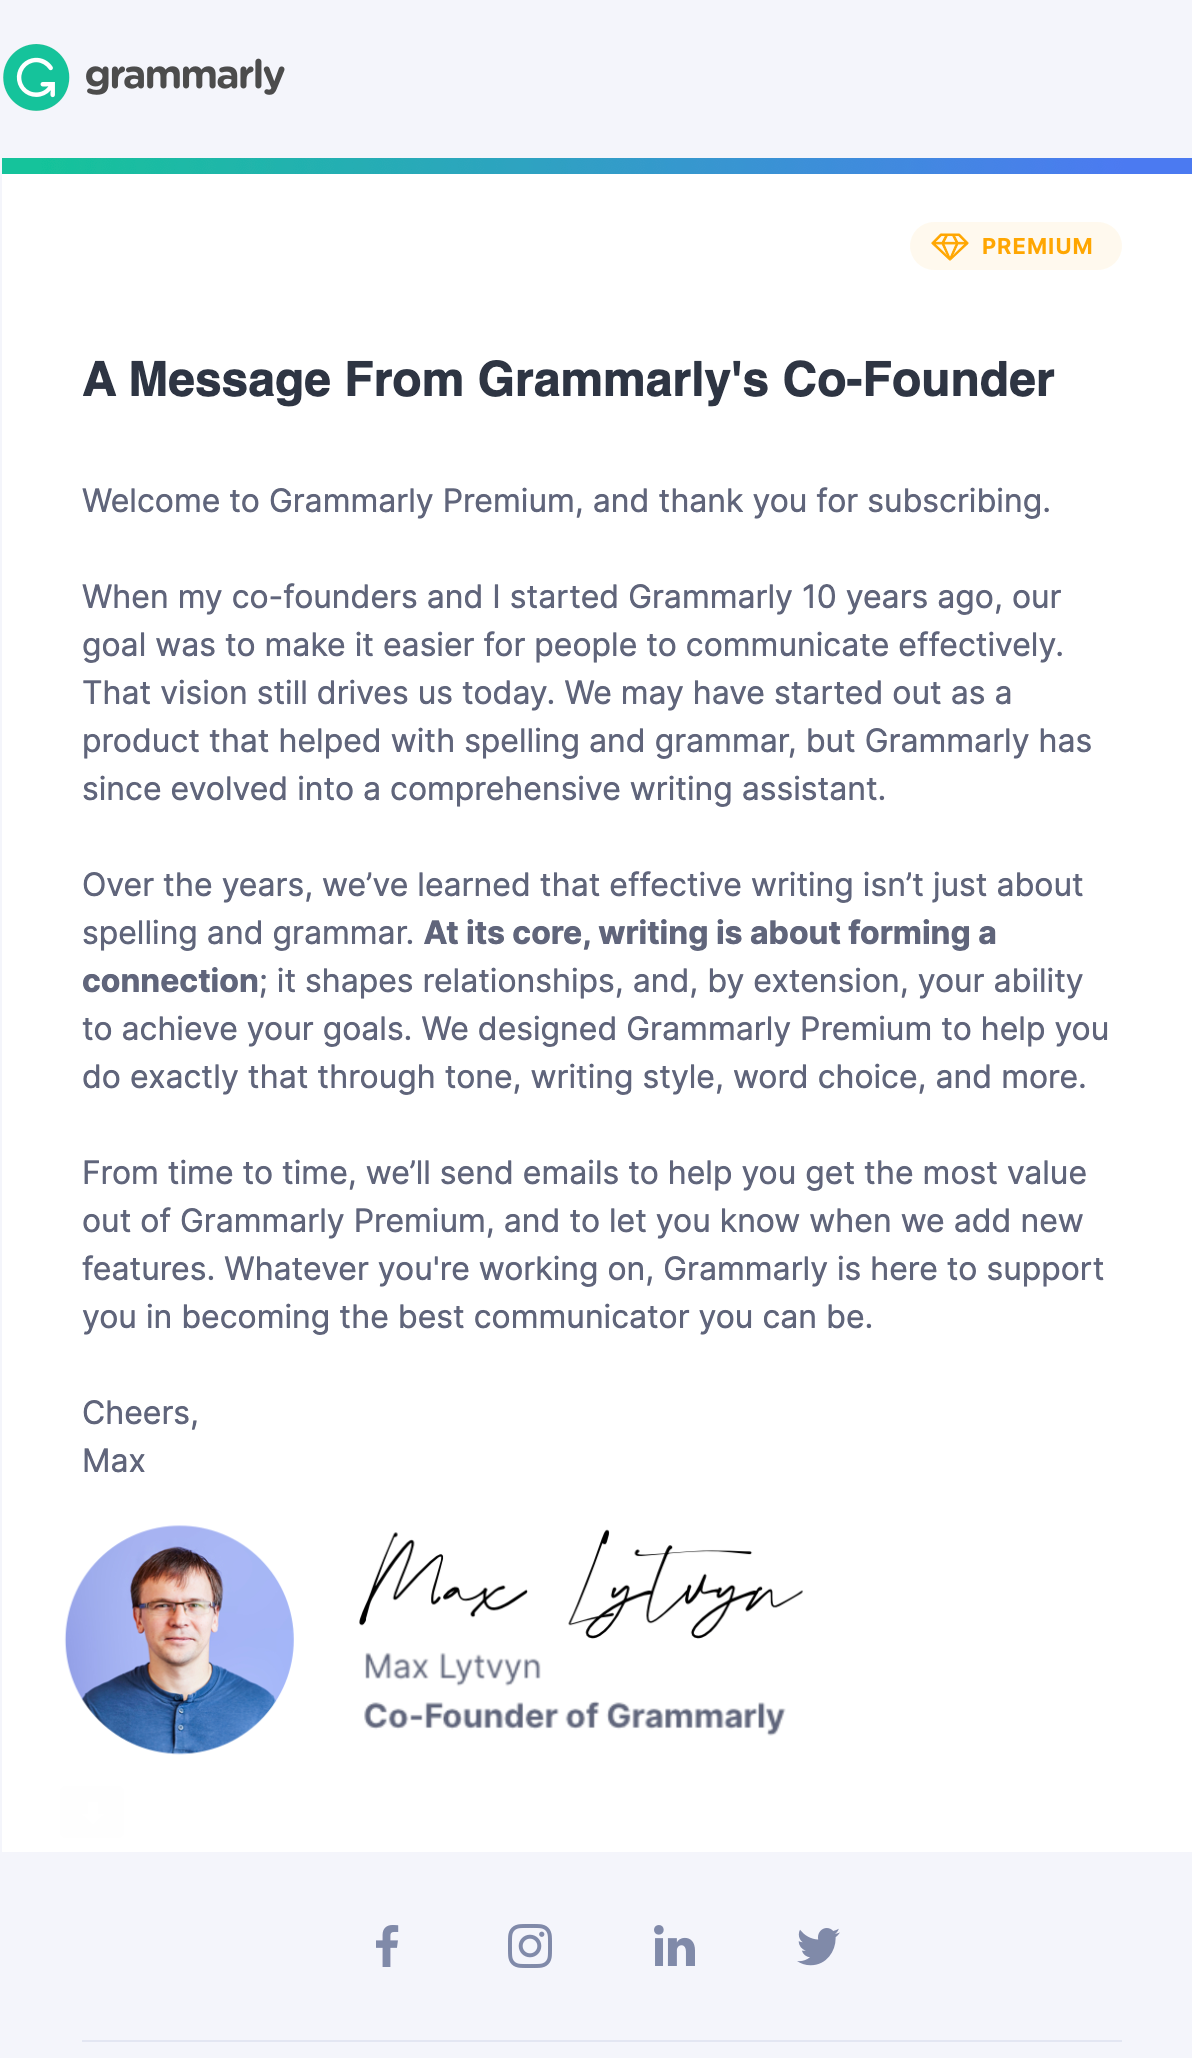 grammarly message from founder